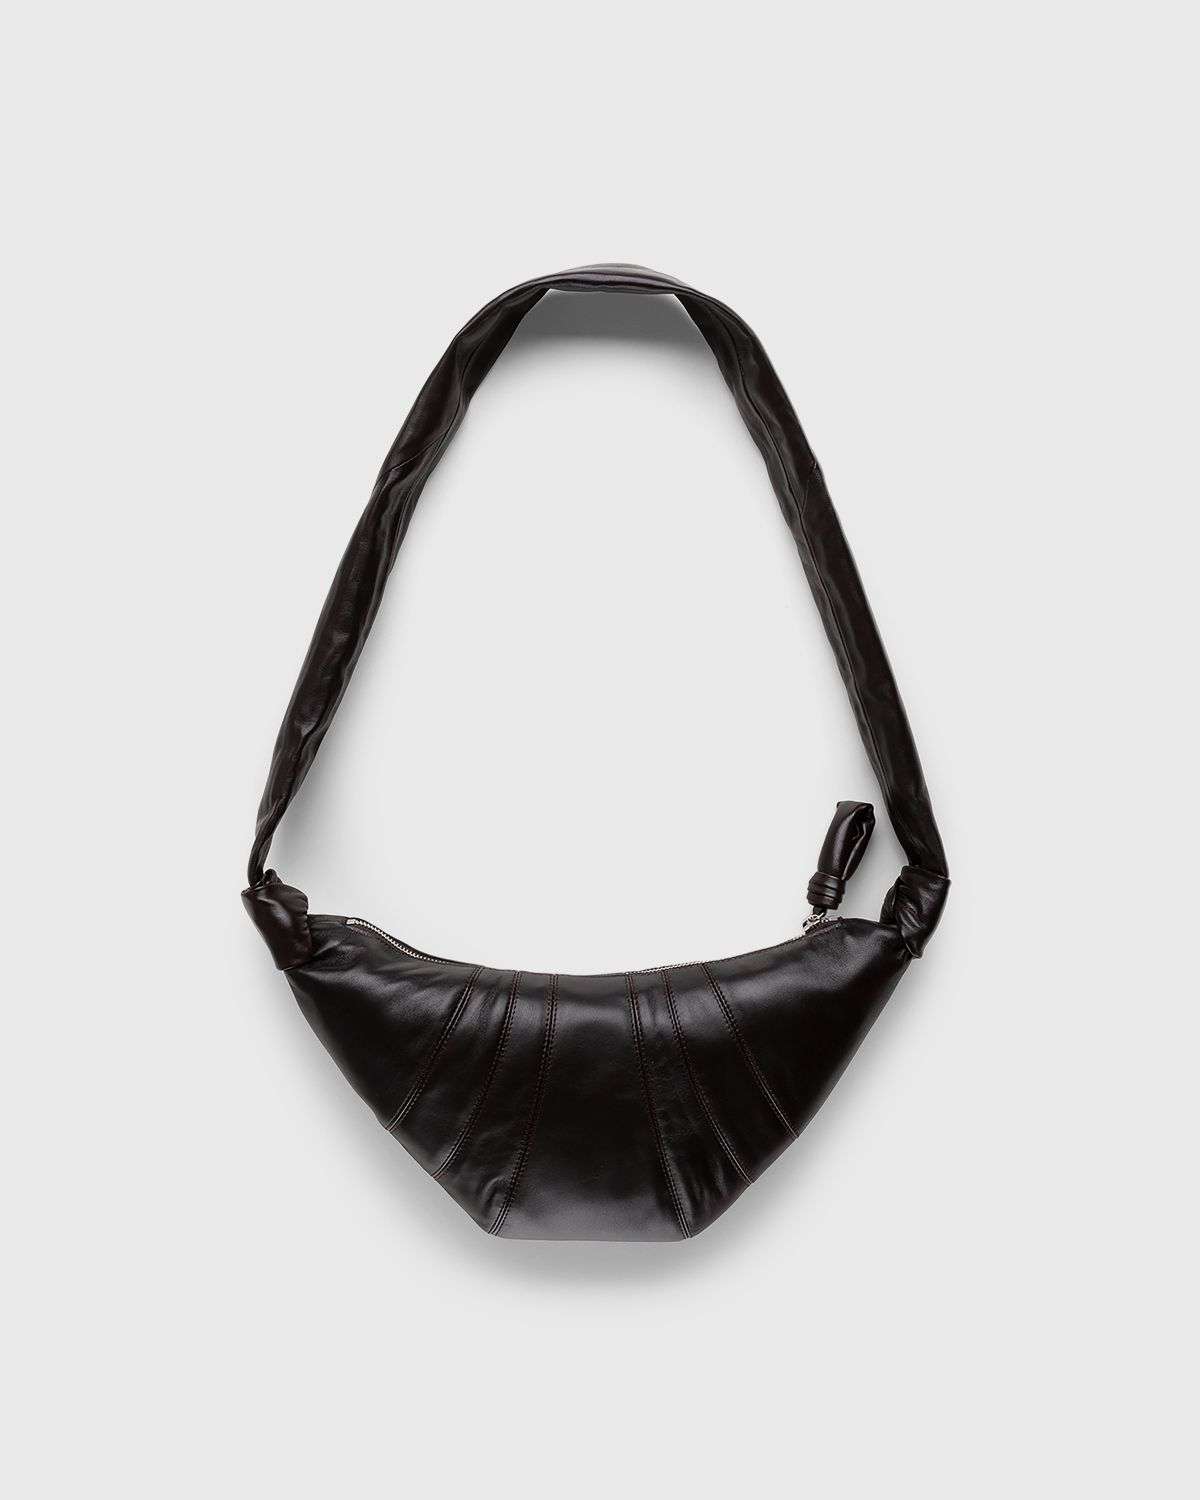 Lemaire x Highsnobiety – Not In Paris 4 Small Croissant Bag Dark Chocolate - Shoulder Bags - Black - Image 2